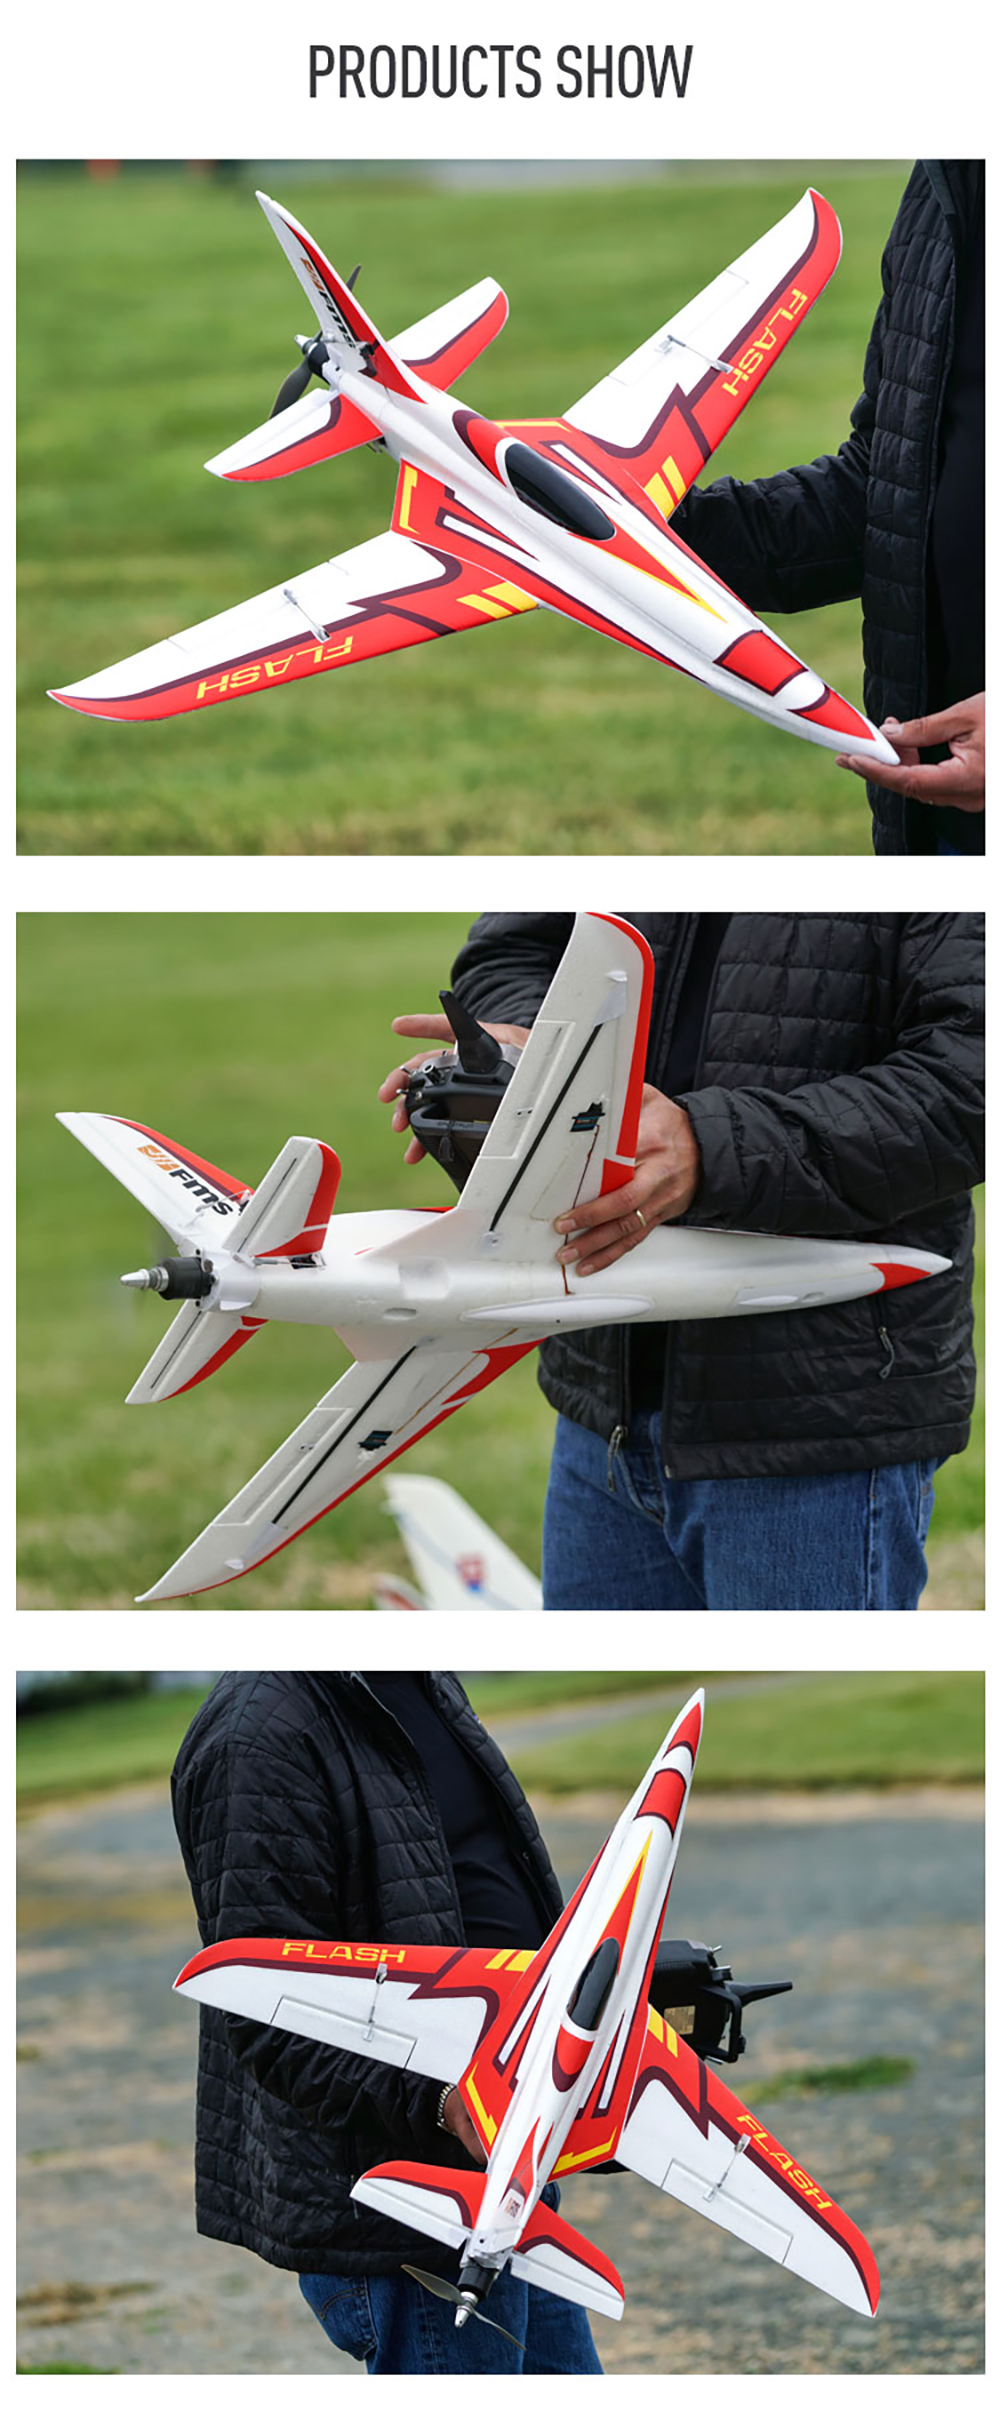 FMS-850mm-Wingspan-Flash-High-Speed-180kmh-4S-Racer-EPO-RC-Airplane-PNP-with-Reflex-Stabilizer-Fligh-1774714-5